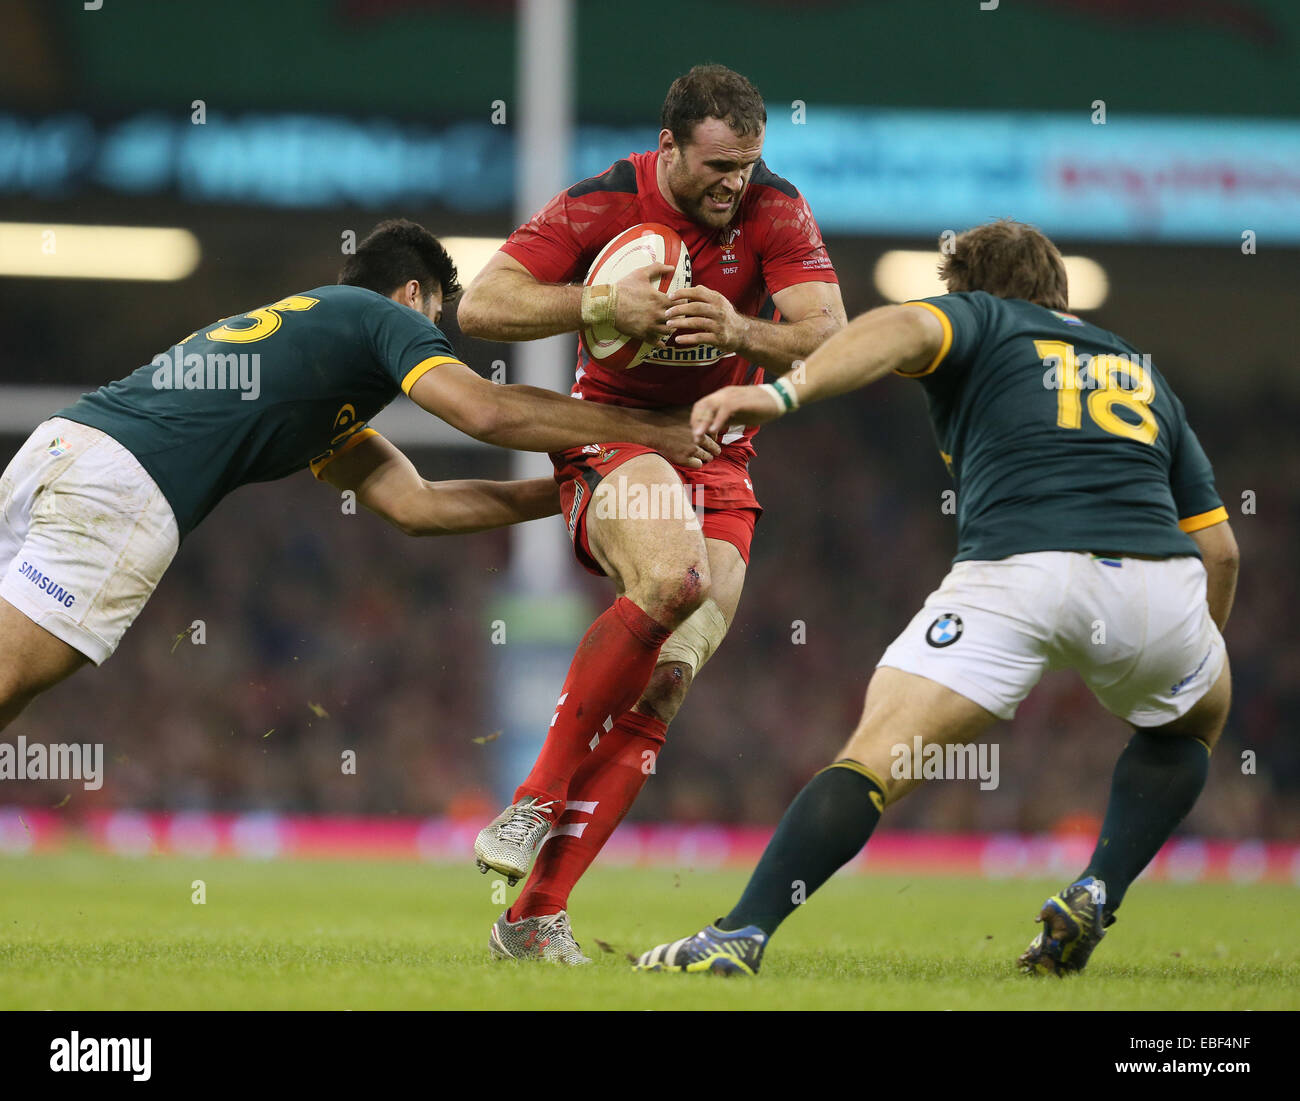 Cardiff, UK. 29th Nov, 2014. Jamie Roberts of Wales in action - Autumn Internationals - Wales vs South Africa - Millennium Stadium - Cardiff - Wales - 29th November 2014 - Picture Simon Bellis/Sportimage. Credit:  csm/Alamy Live News Stock Photo